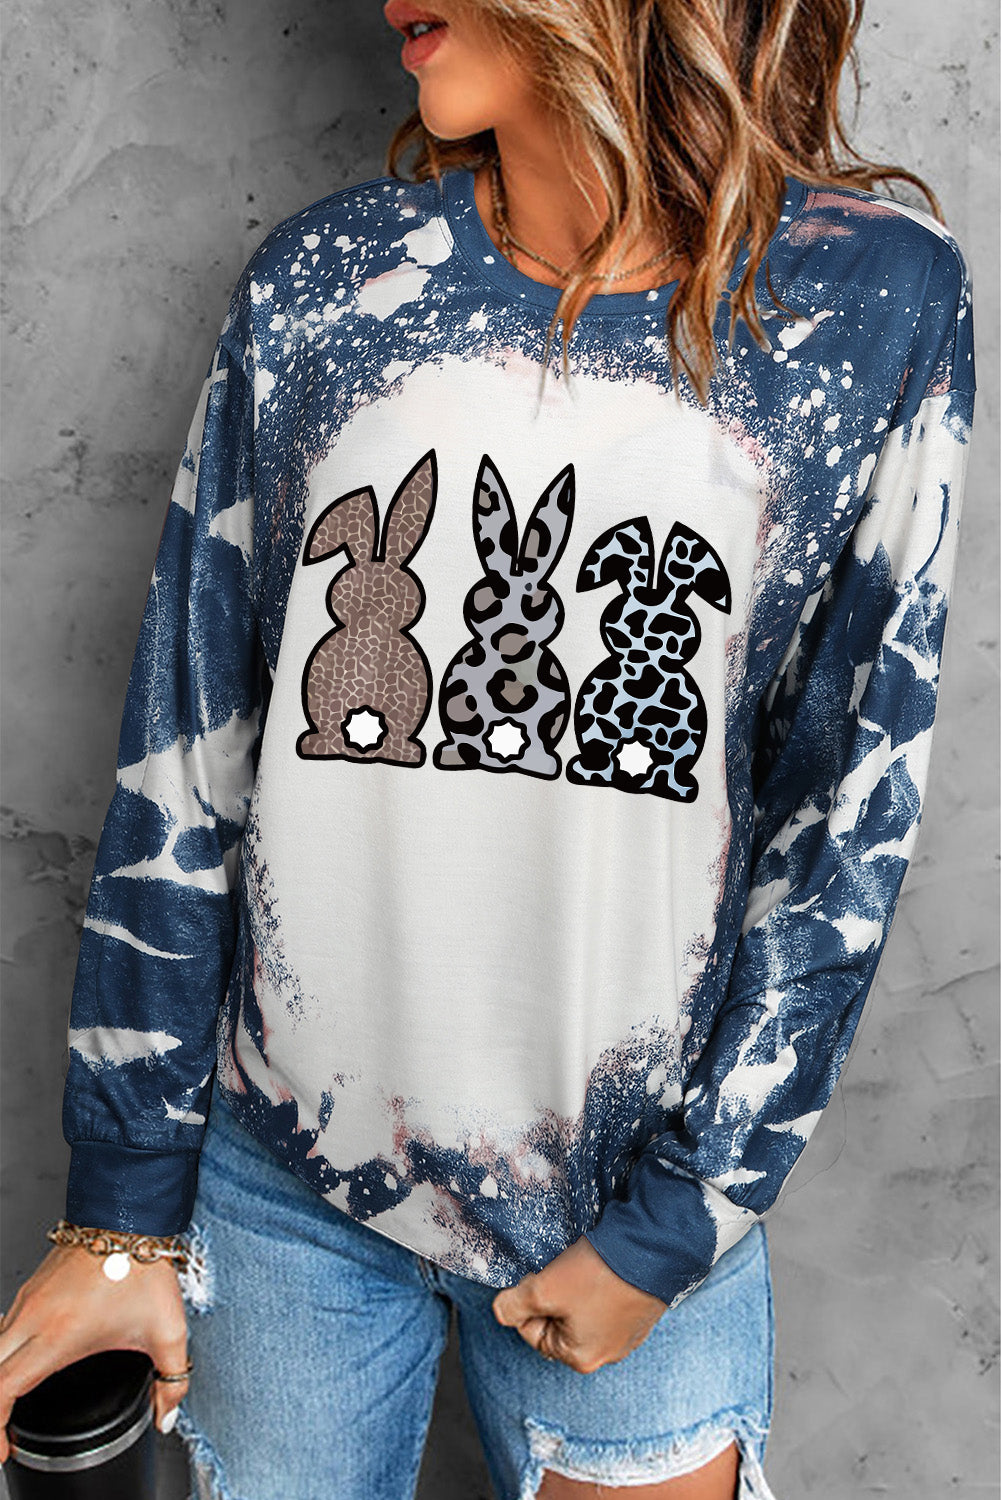 Easter Bunny Leopard Graphic Bleach Dye Long-Sleeve Top Small-2XL